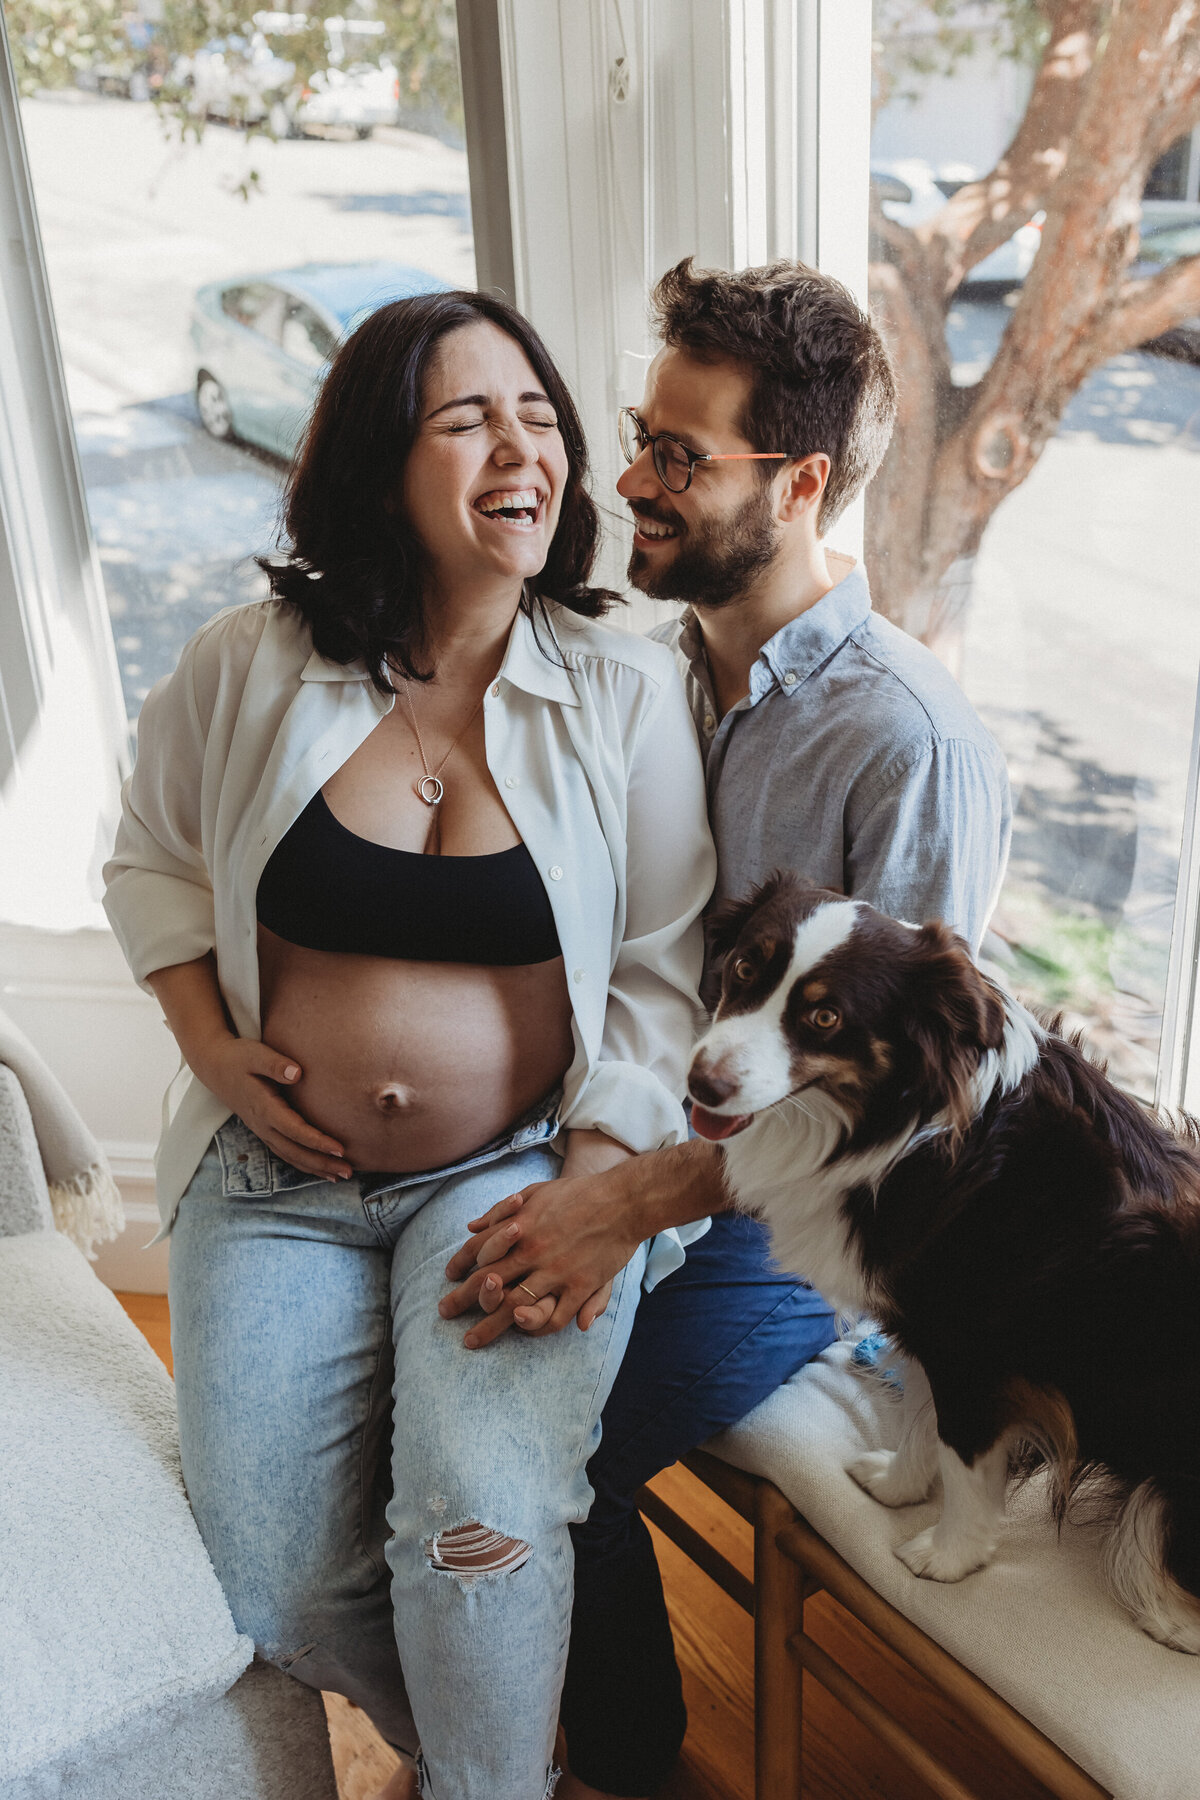 skyler maire photography - san francisco in home maternity photos with dog, bay area maternity photography, intimate maternity photoshoot-2736